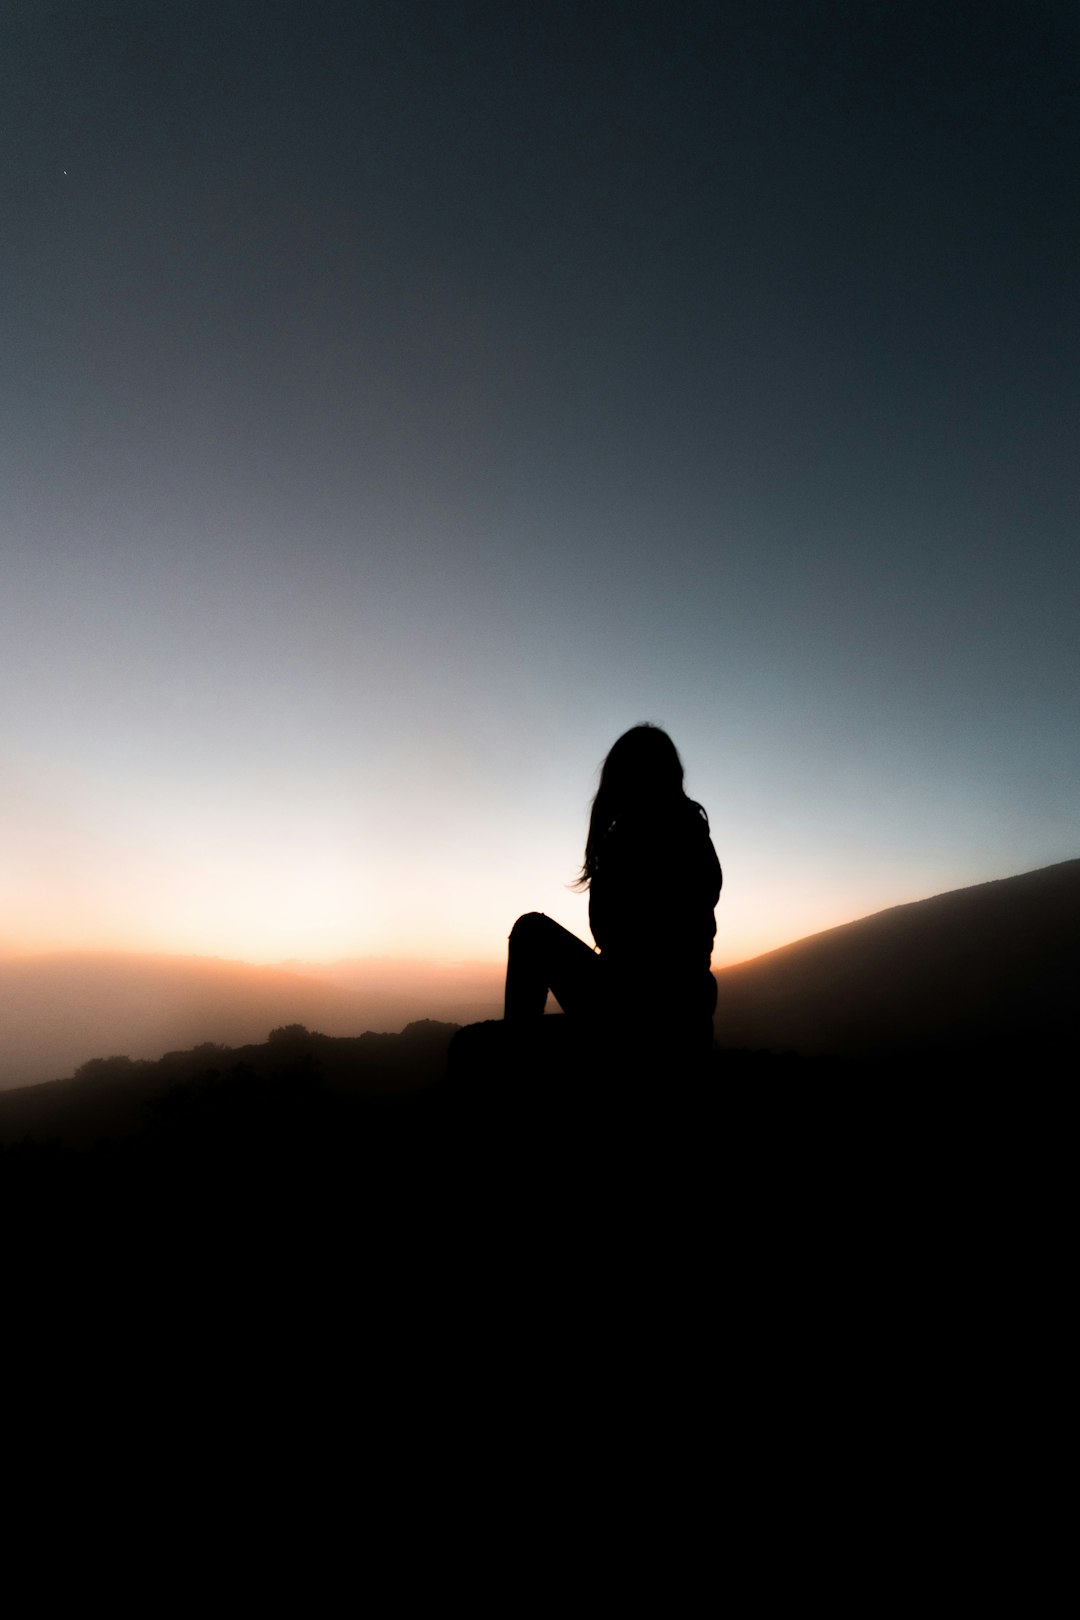 silhouette of woman sitting on rock during sunset